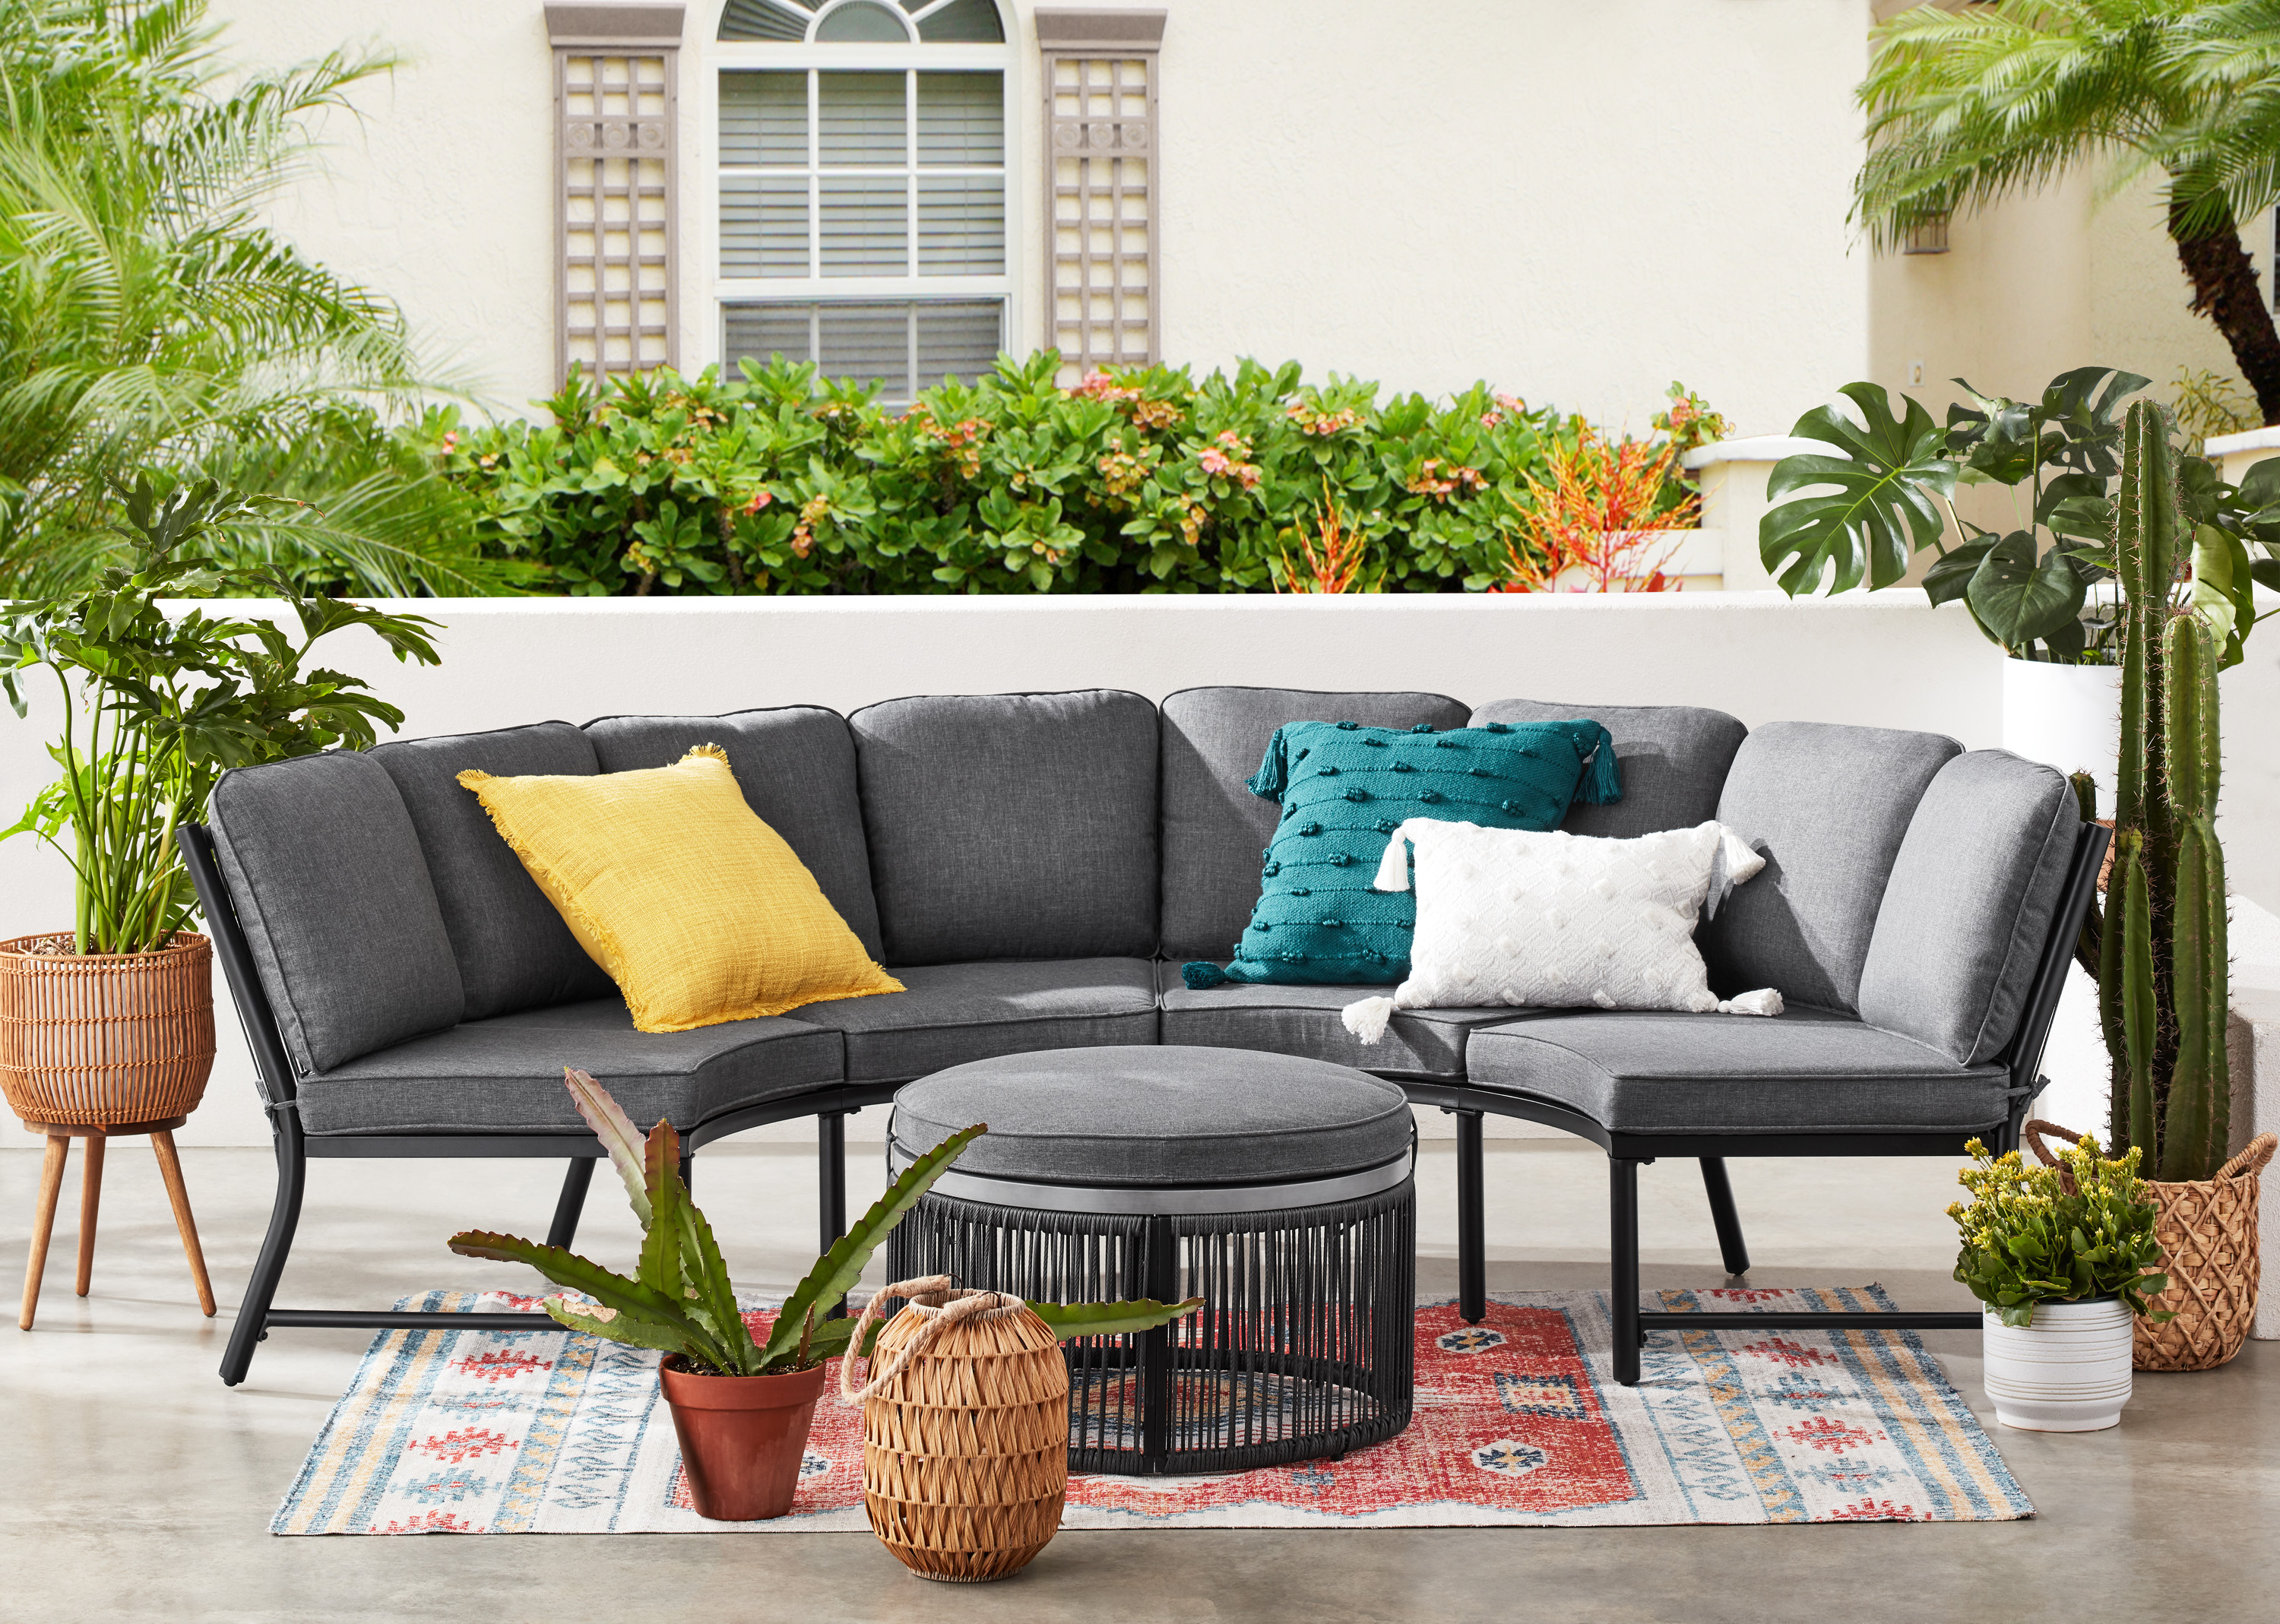 Mainstays Lawson Ridge 3-Piece Steel Curved Outdoor Sectional Set with Cushions, Gray - image 1 of 8